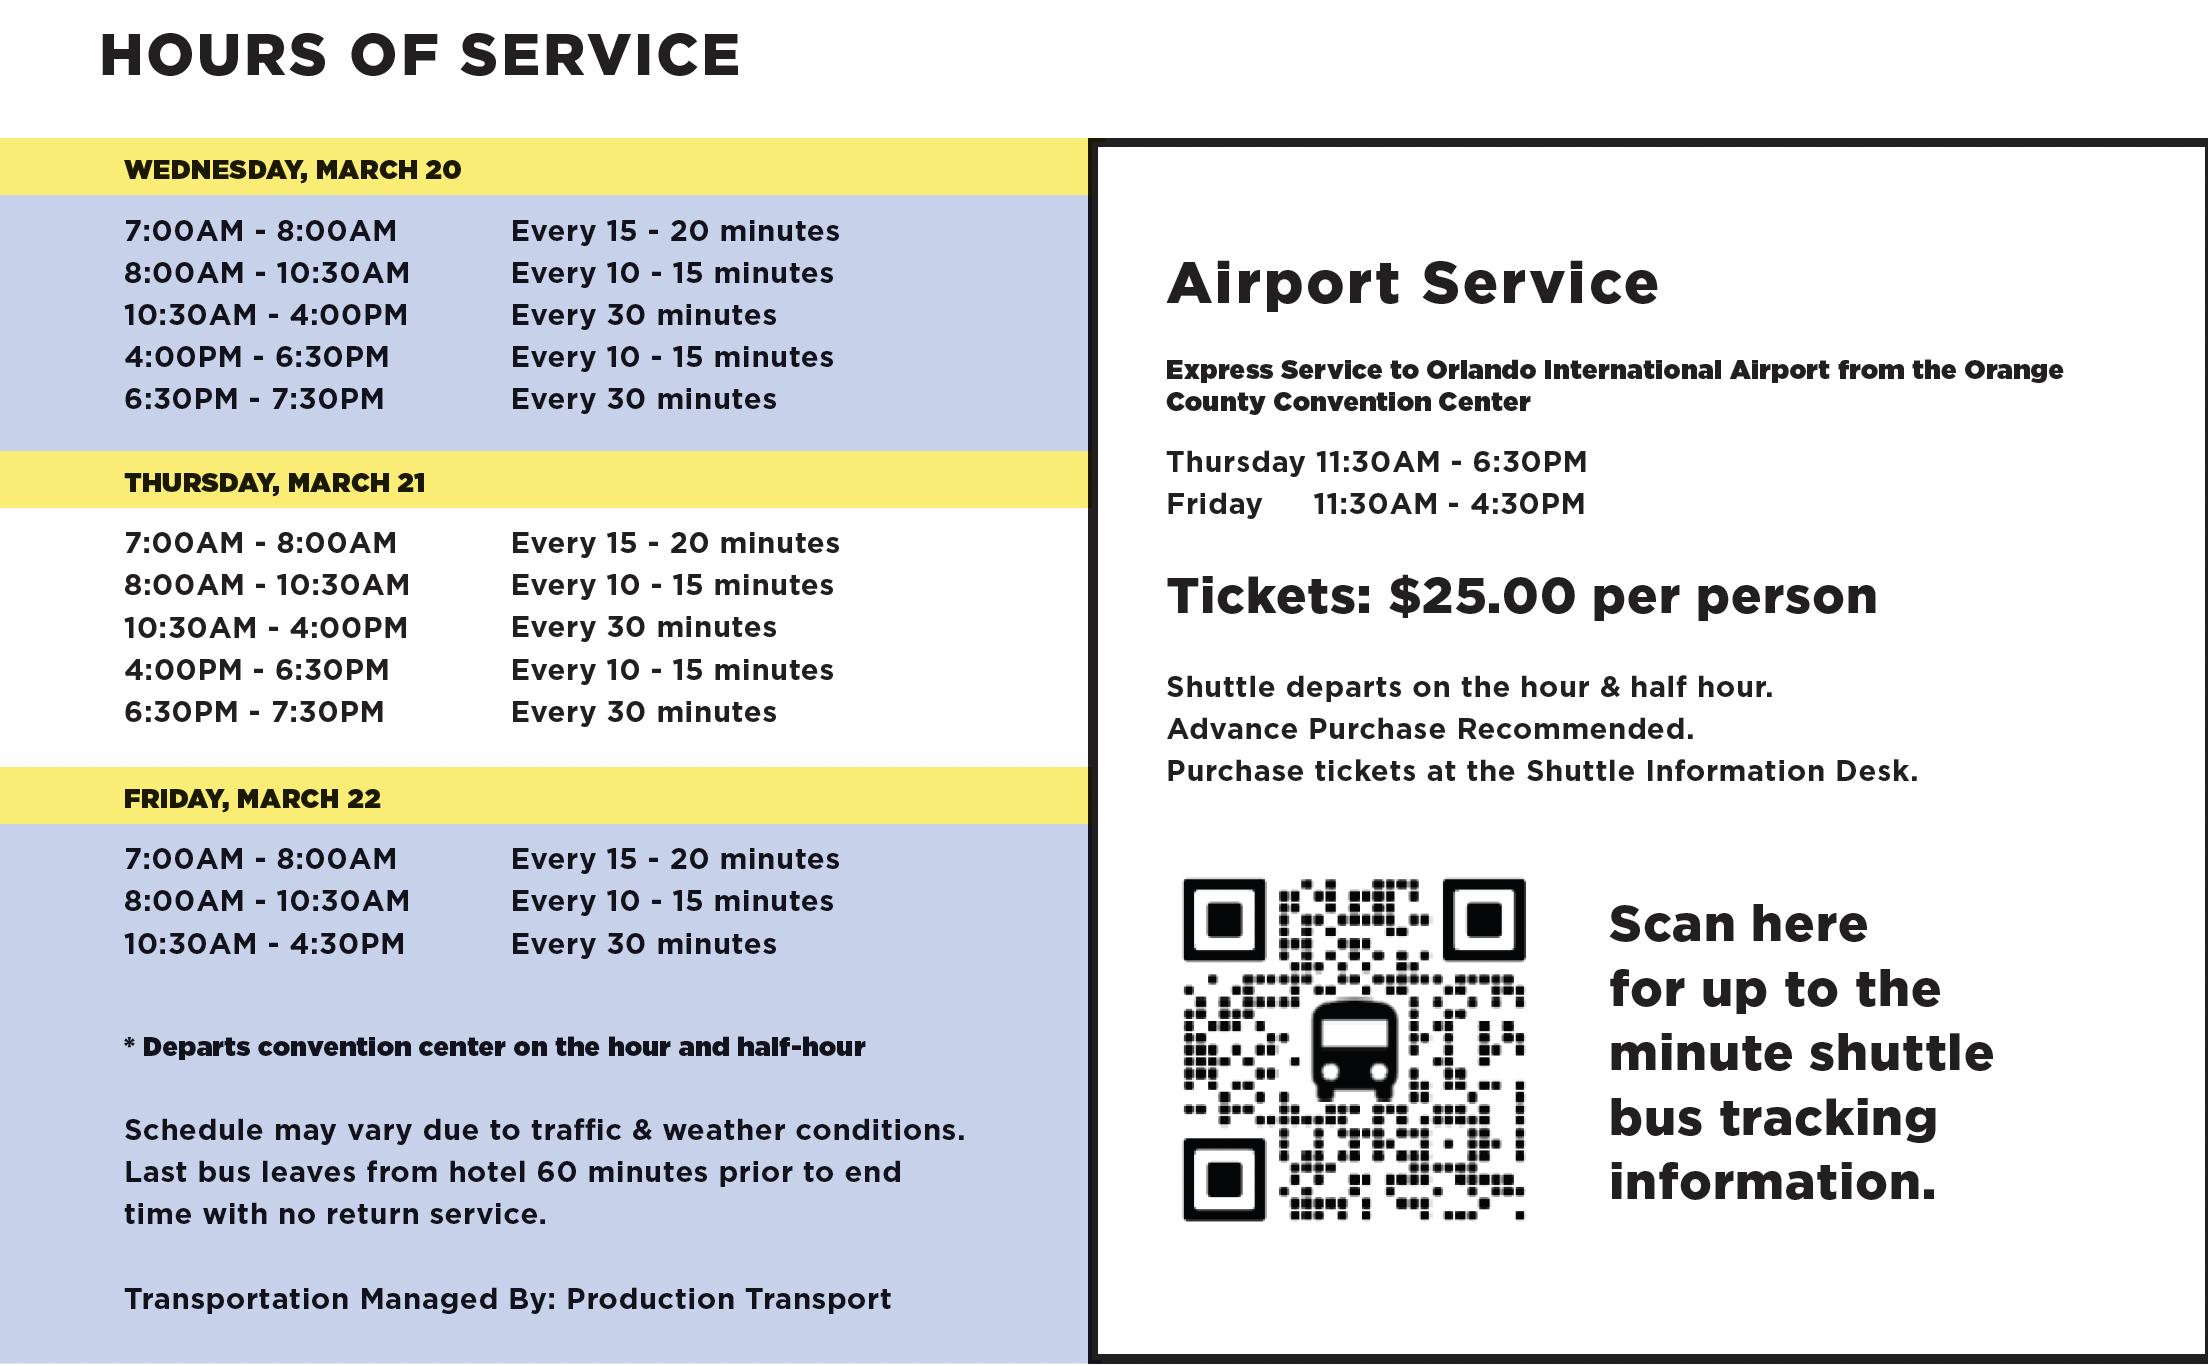 Hours of Service and Airport Service Information